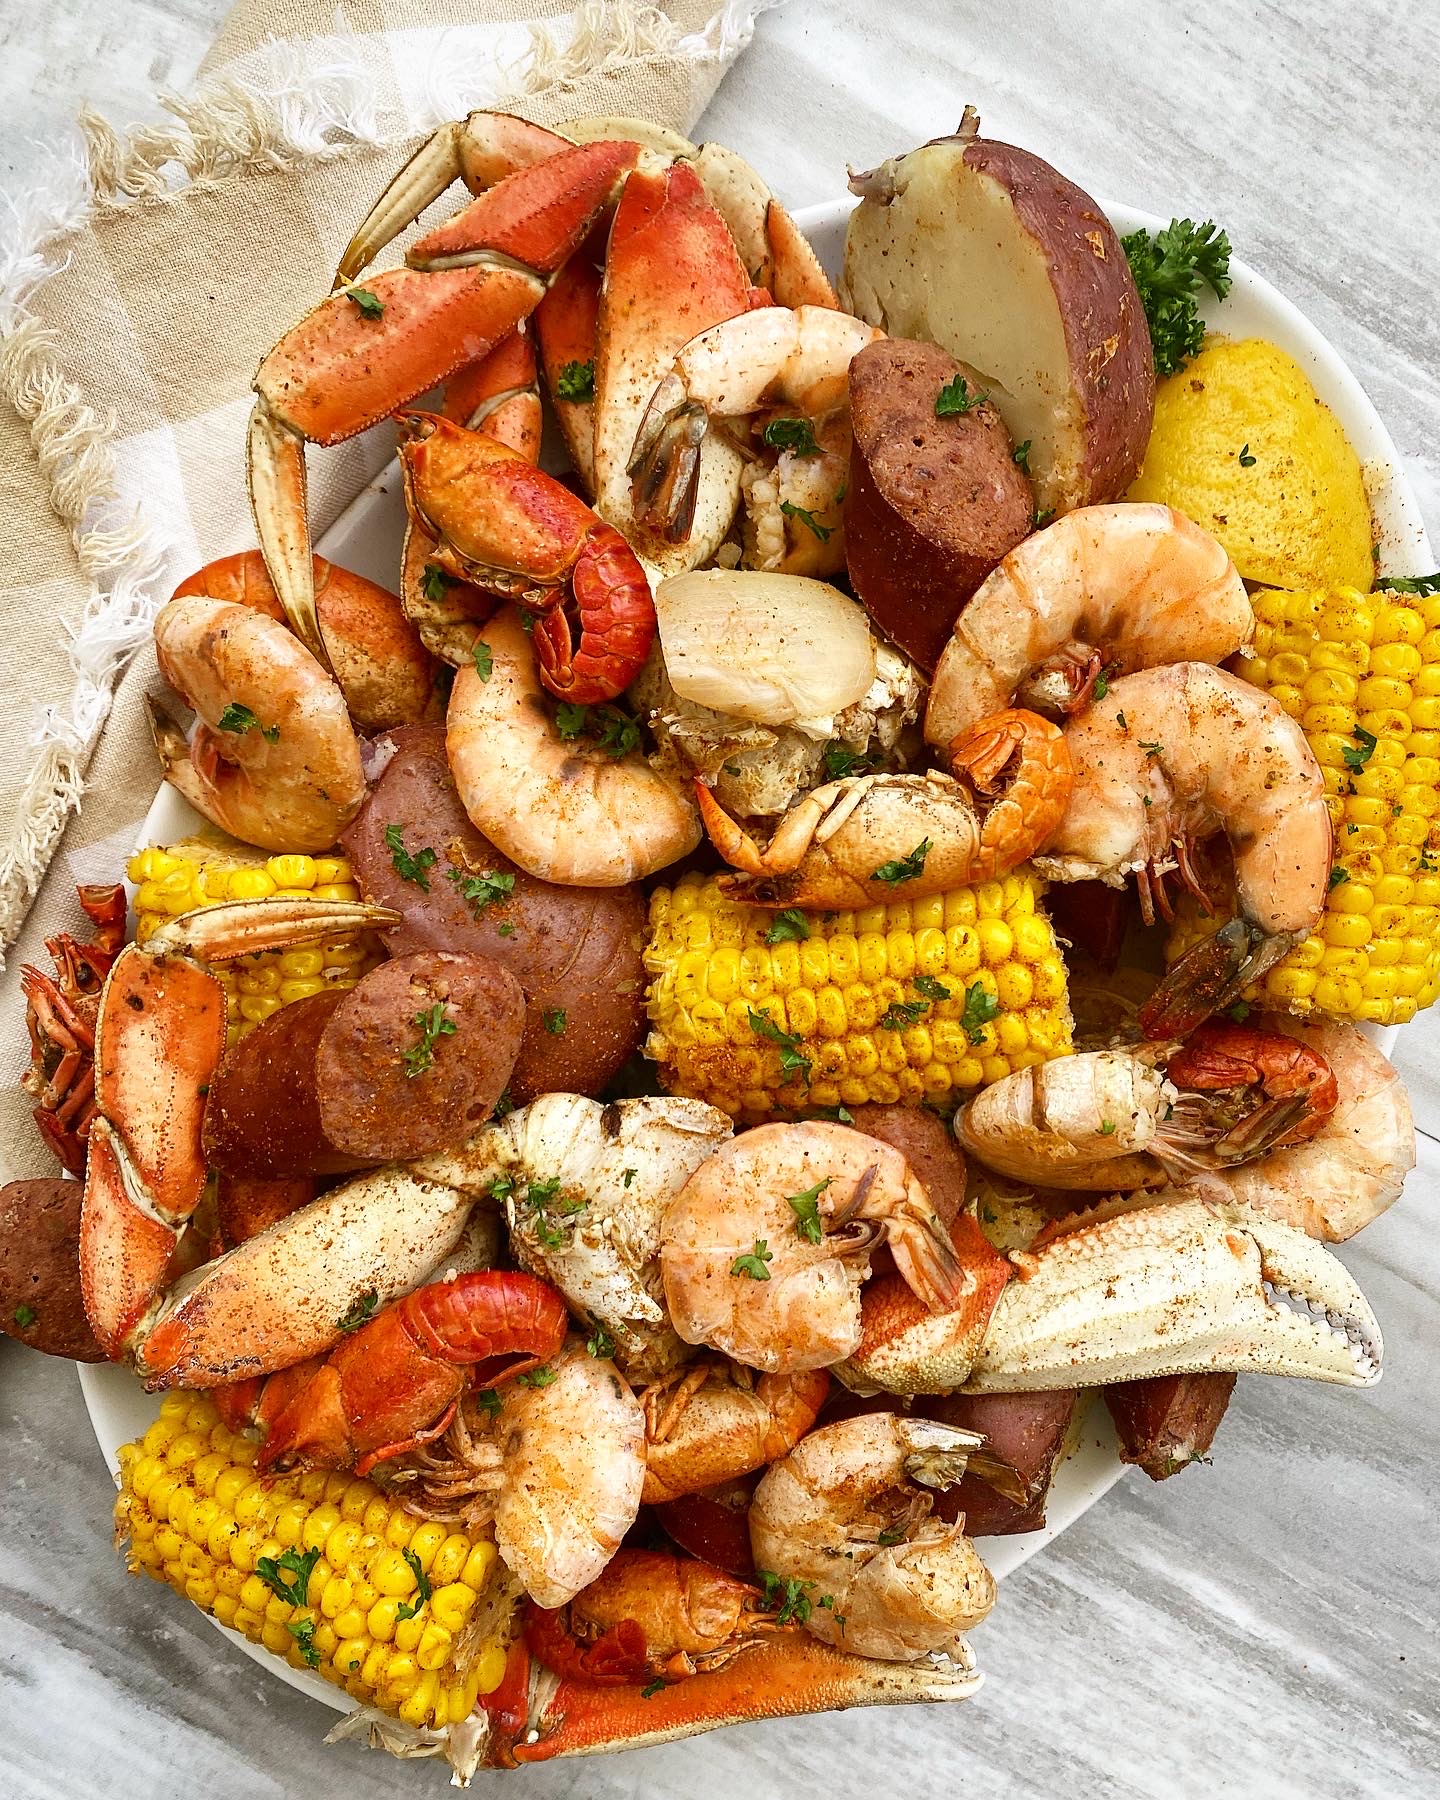 Easy Seafood Boil Recipe (one pot dinner!) - Fit Foodie Finds